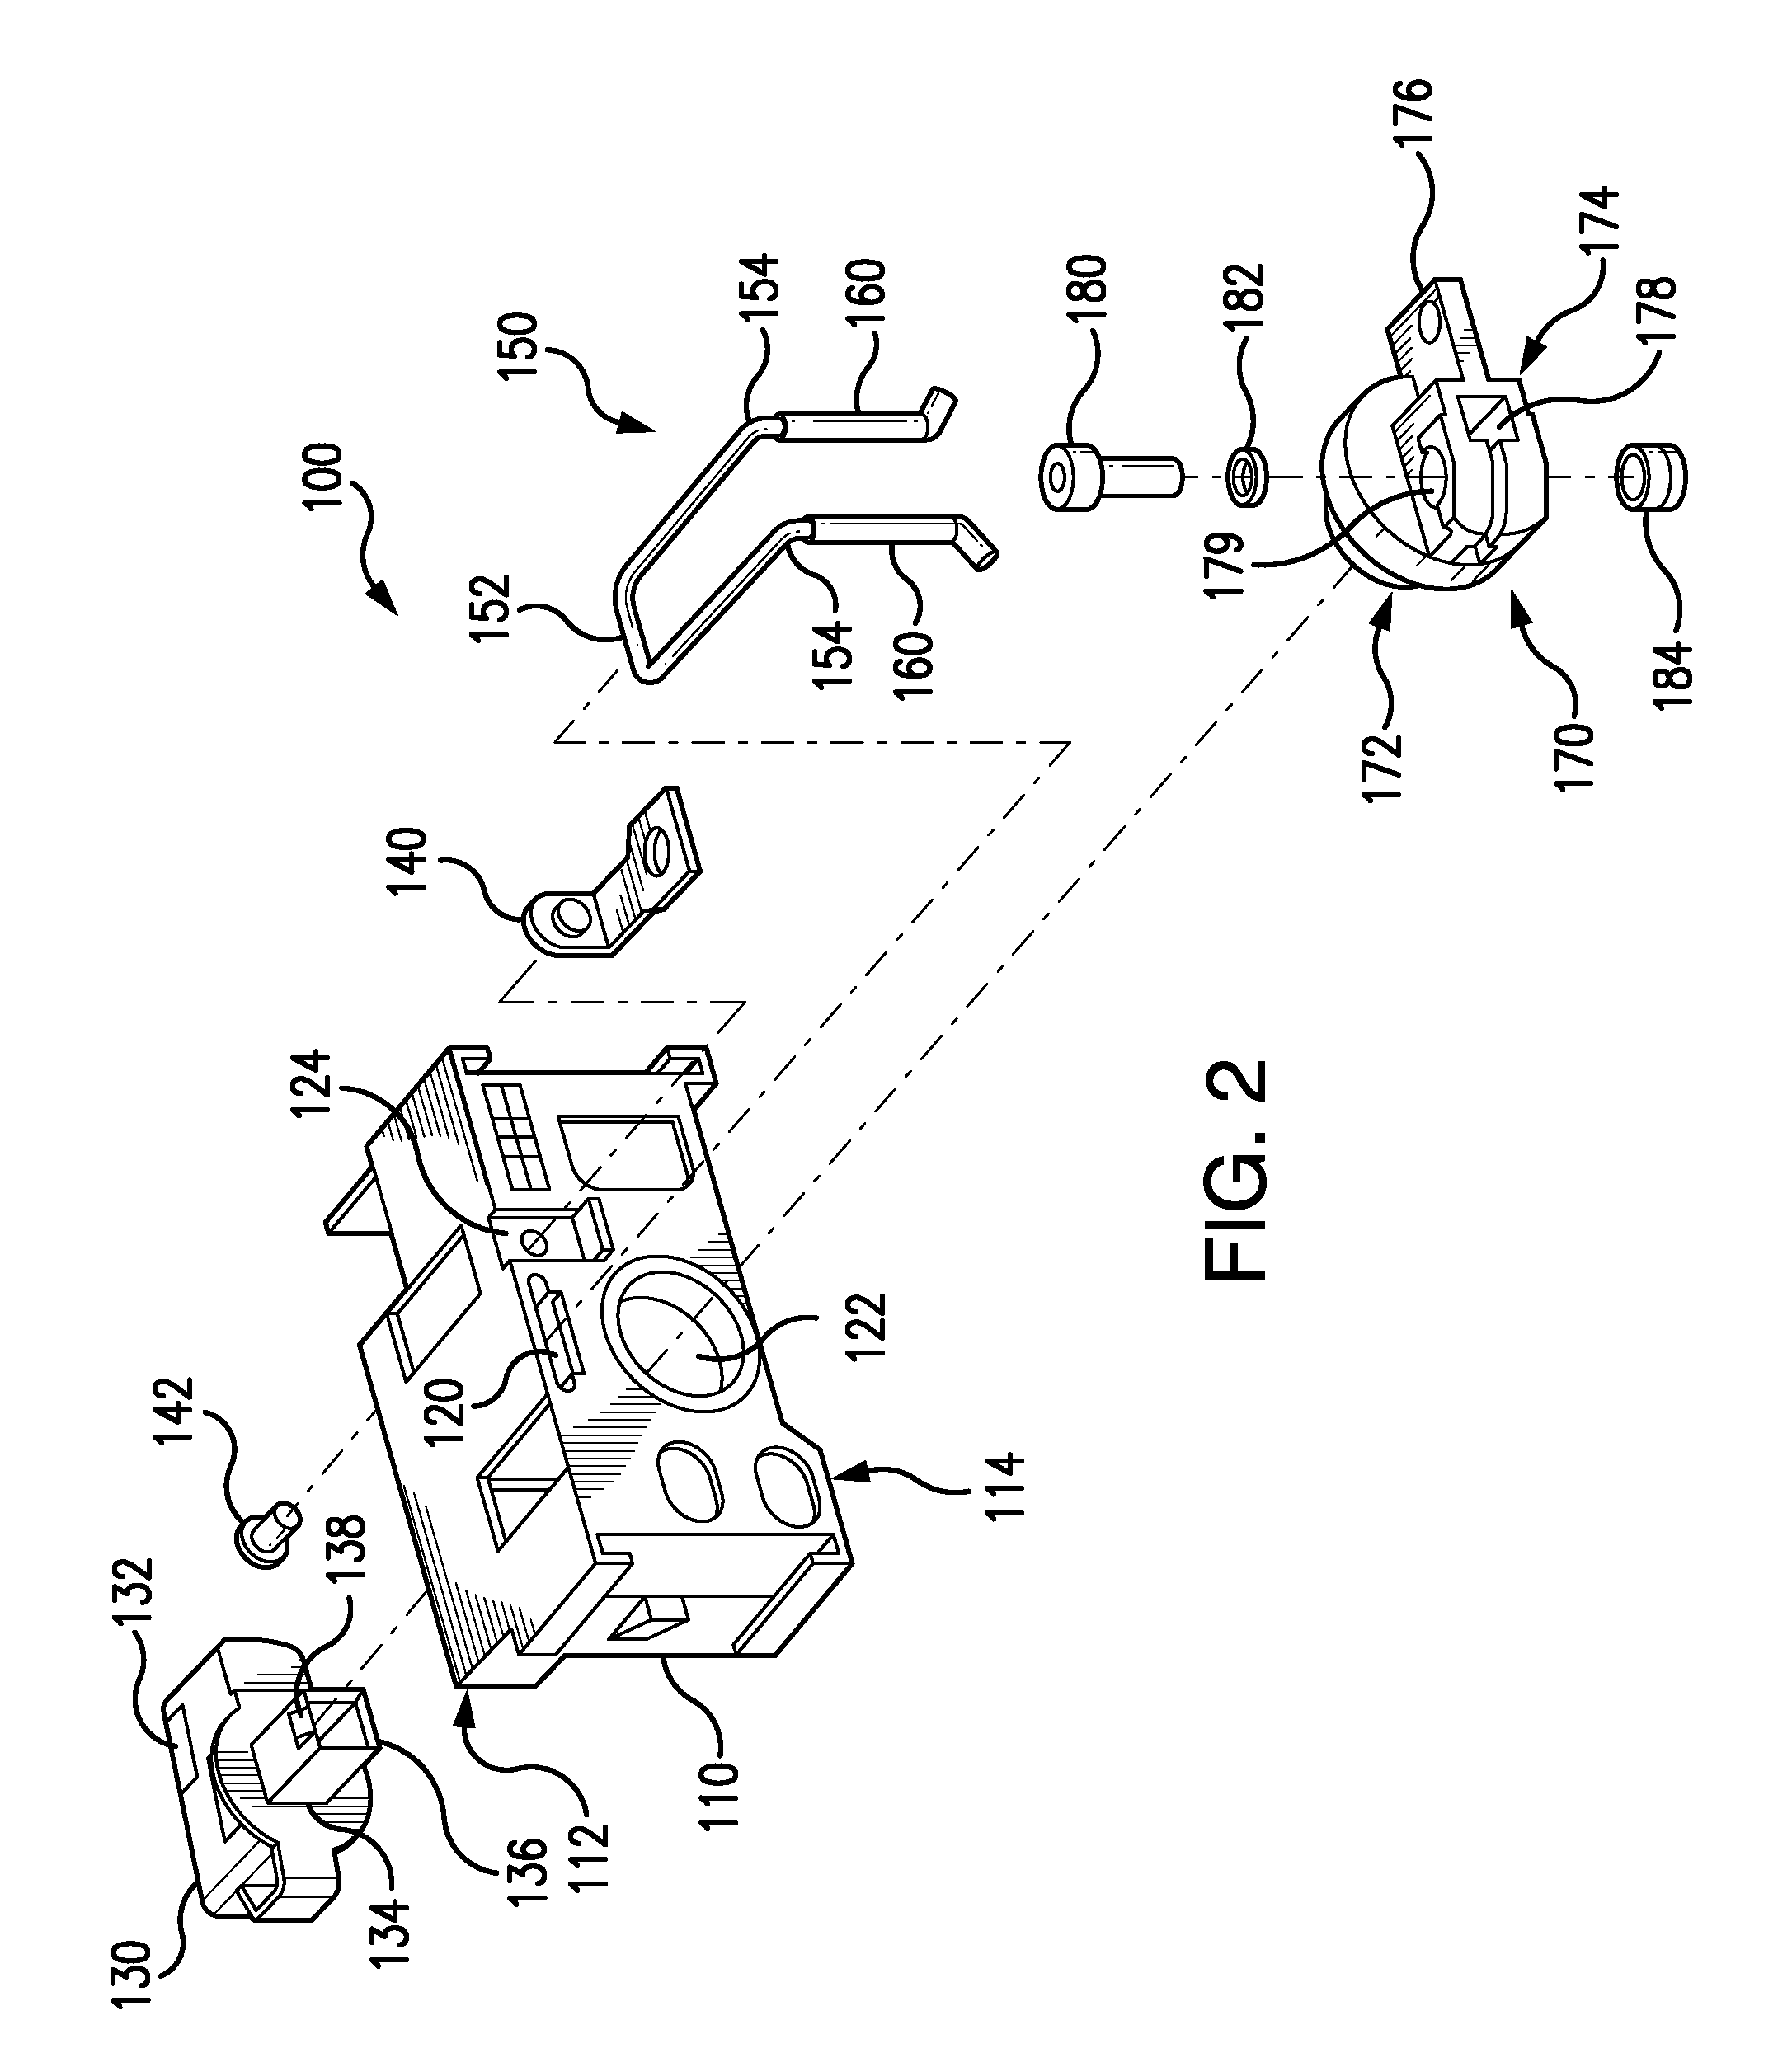 Over-center handle mechanism for increased tactile feedback on a rotary actuator